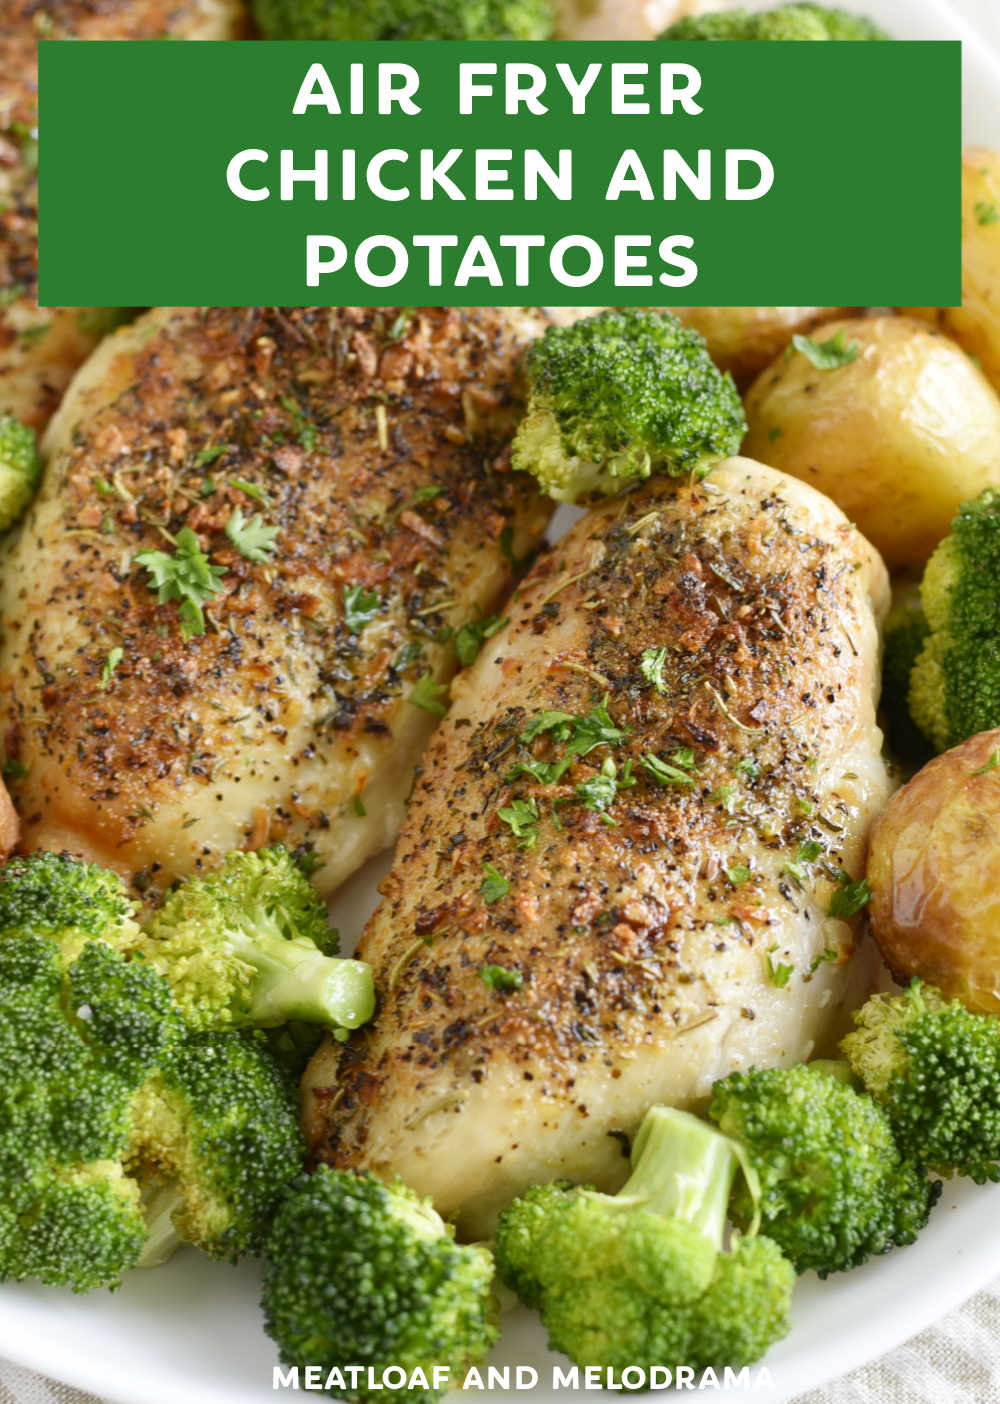 Air Fryer Chicken and Potatoes is an easy dinner of herbed chicken breasts, baby potatoes and broccoli all cooked together in under 30 minutes! A complete meal your whole family will love!  via @meamel